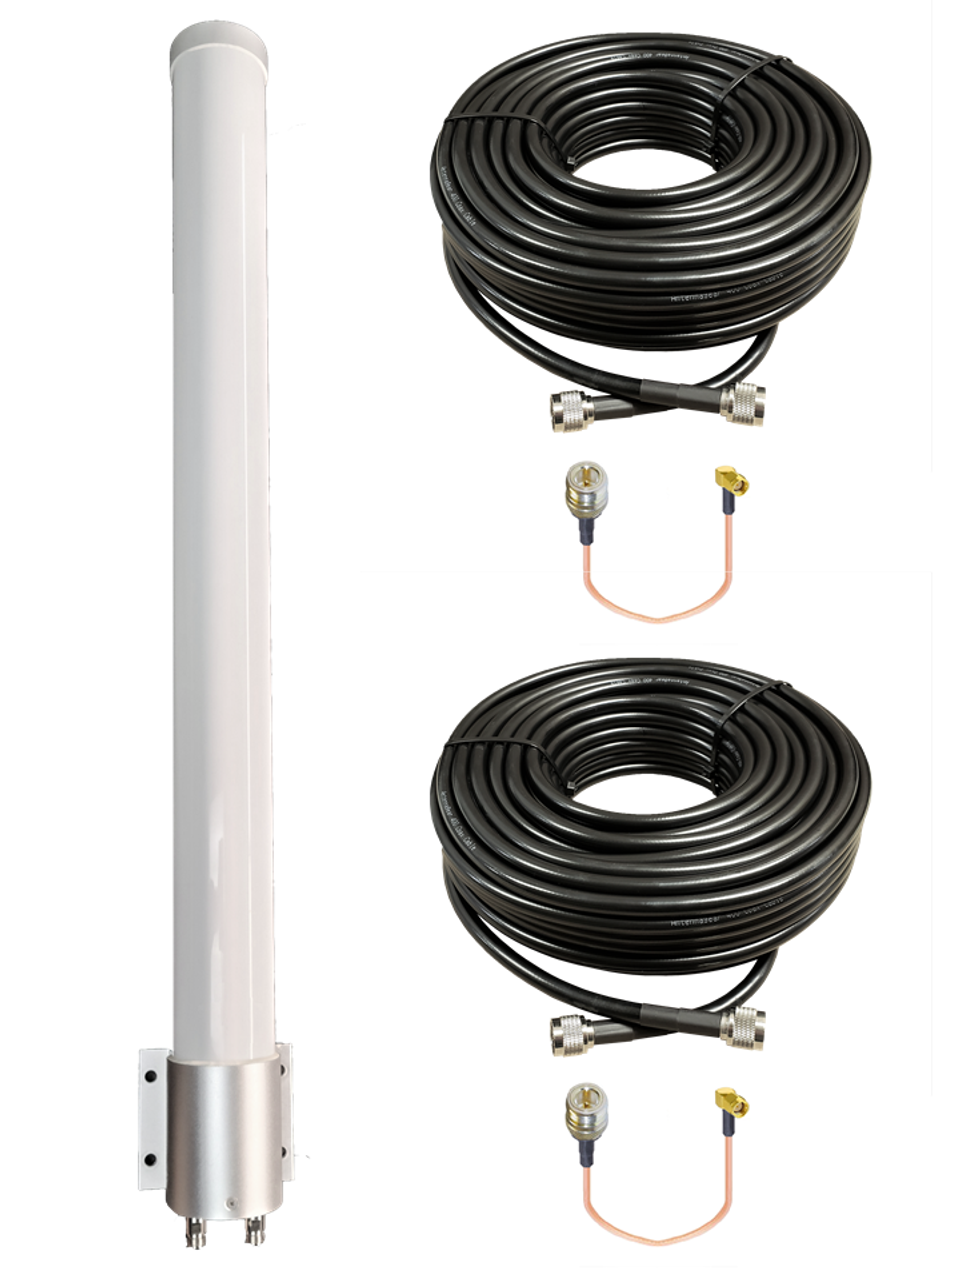 M39 Omni Directional MIMO 2 x Cellular 4G 5G LTE Antenna for AT&T U115 Gateway w/ Bracket Mount - 2 x N Female w/Cable Length Options.